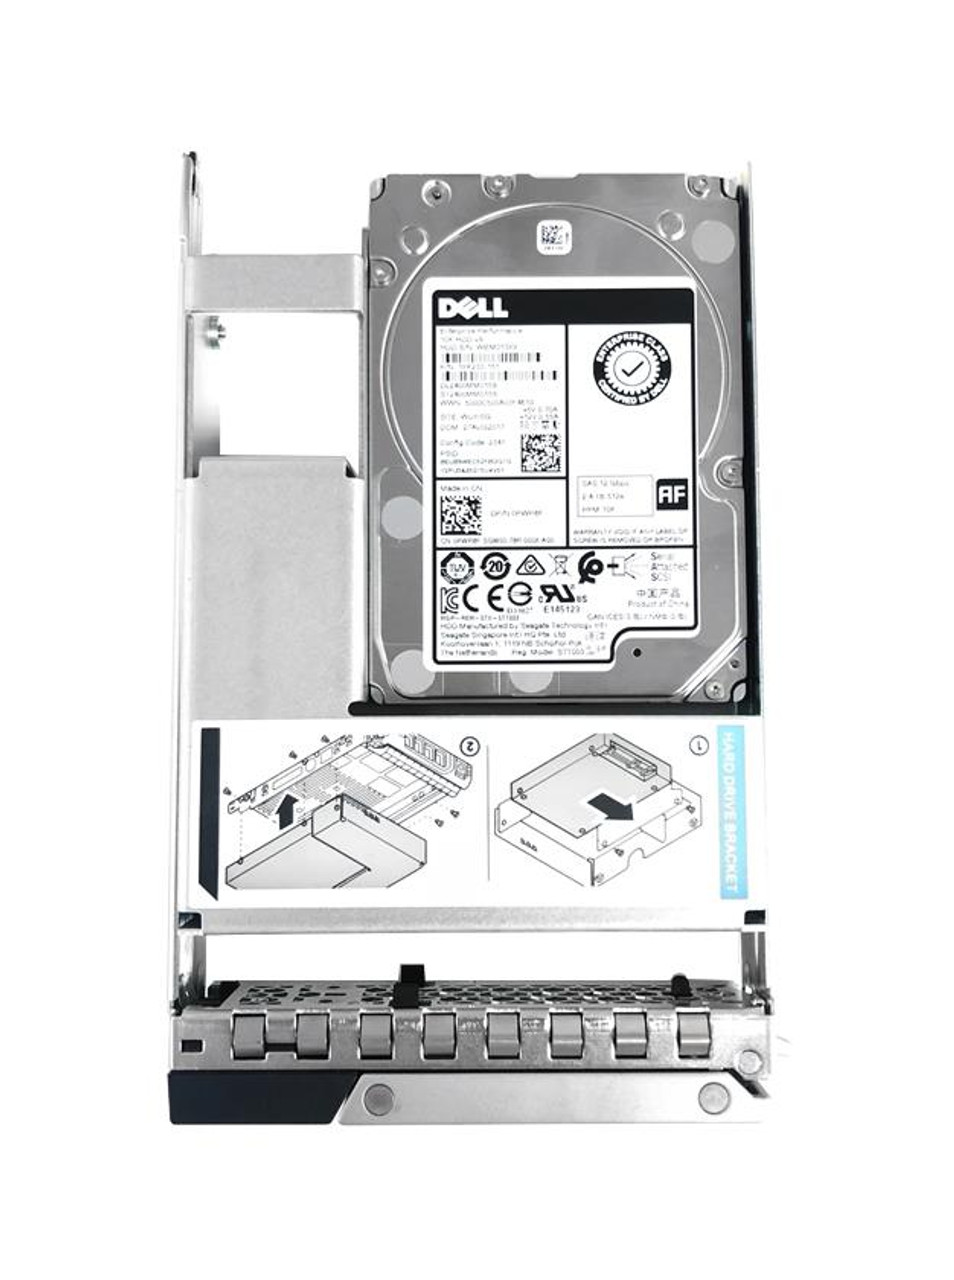 400-AVOH Dell 1.8TB 10000RPM SAS 12Gbps 2.5-inch Internal Hard Drive with 3.5-inch Hybrid Carrier